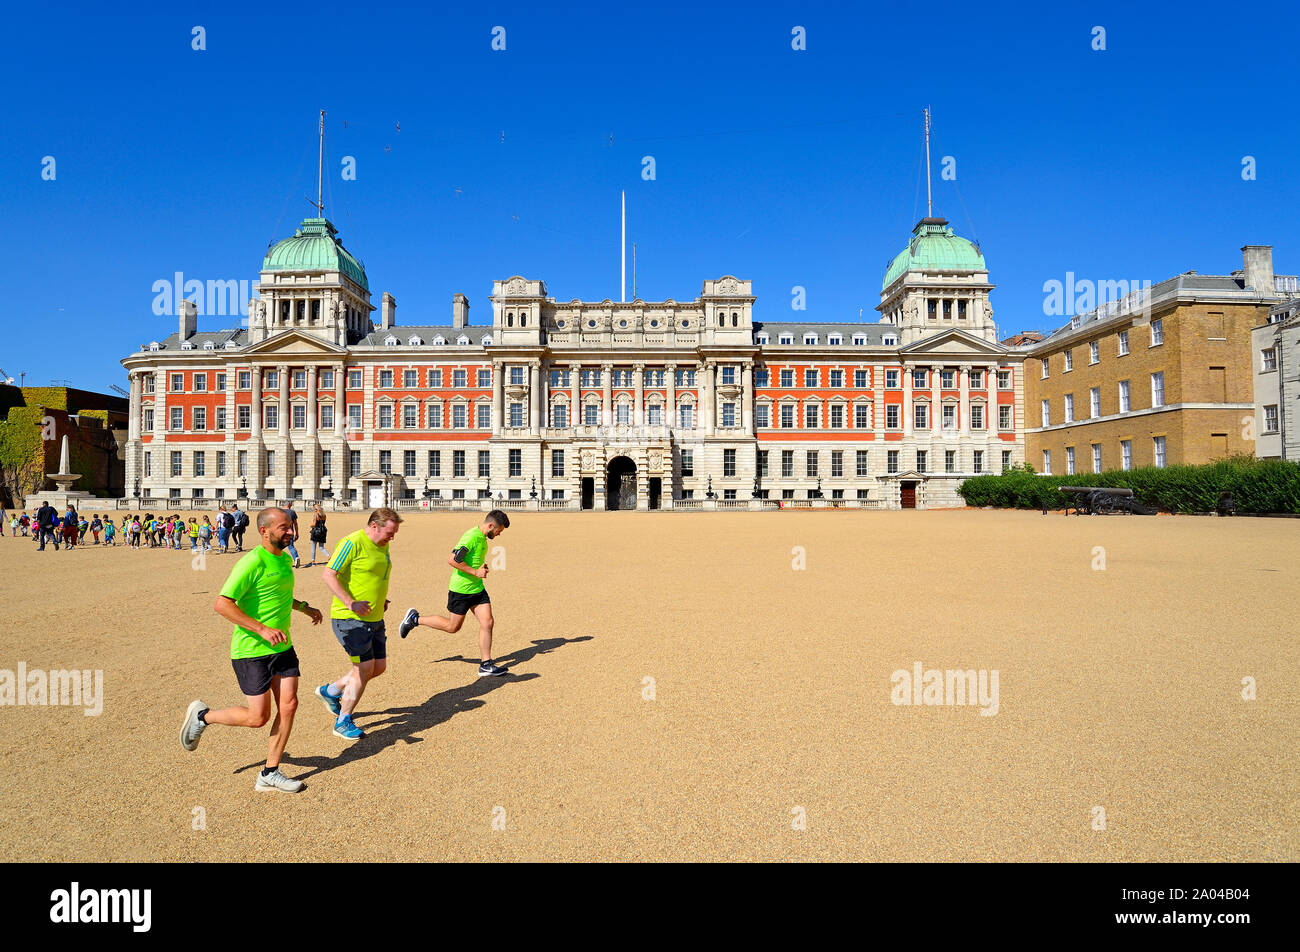 London, England UK. Horse Guards Parade and the Old Admiralty Building. Three men jogging Stock Photo